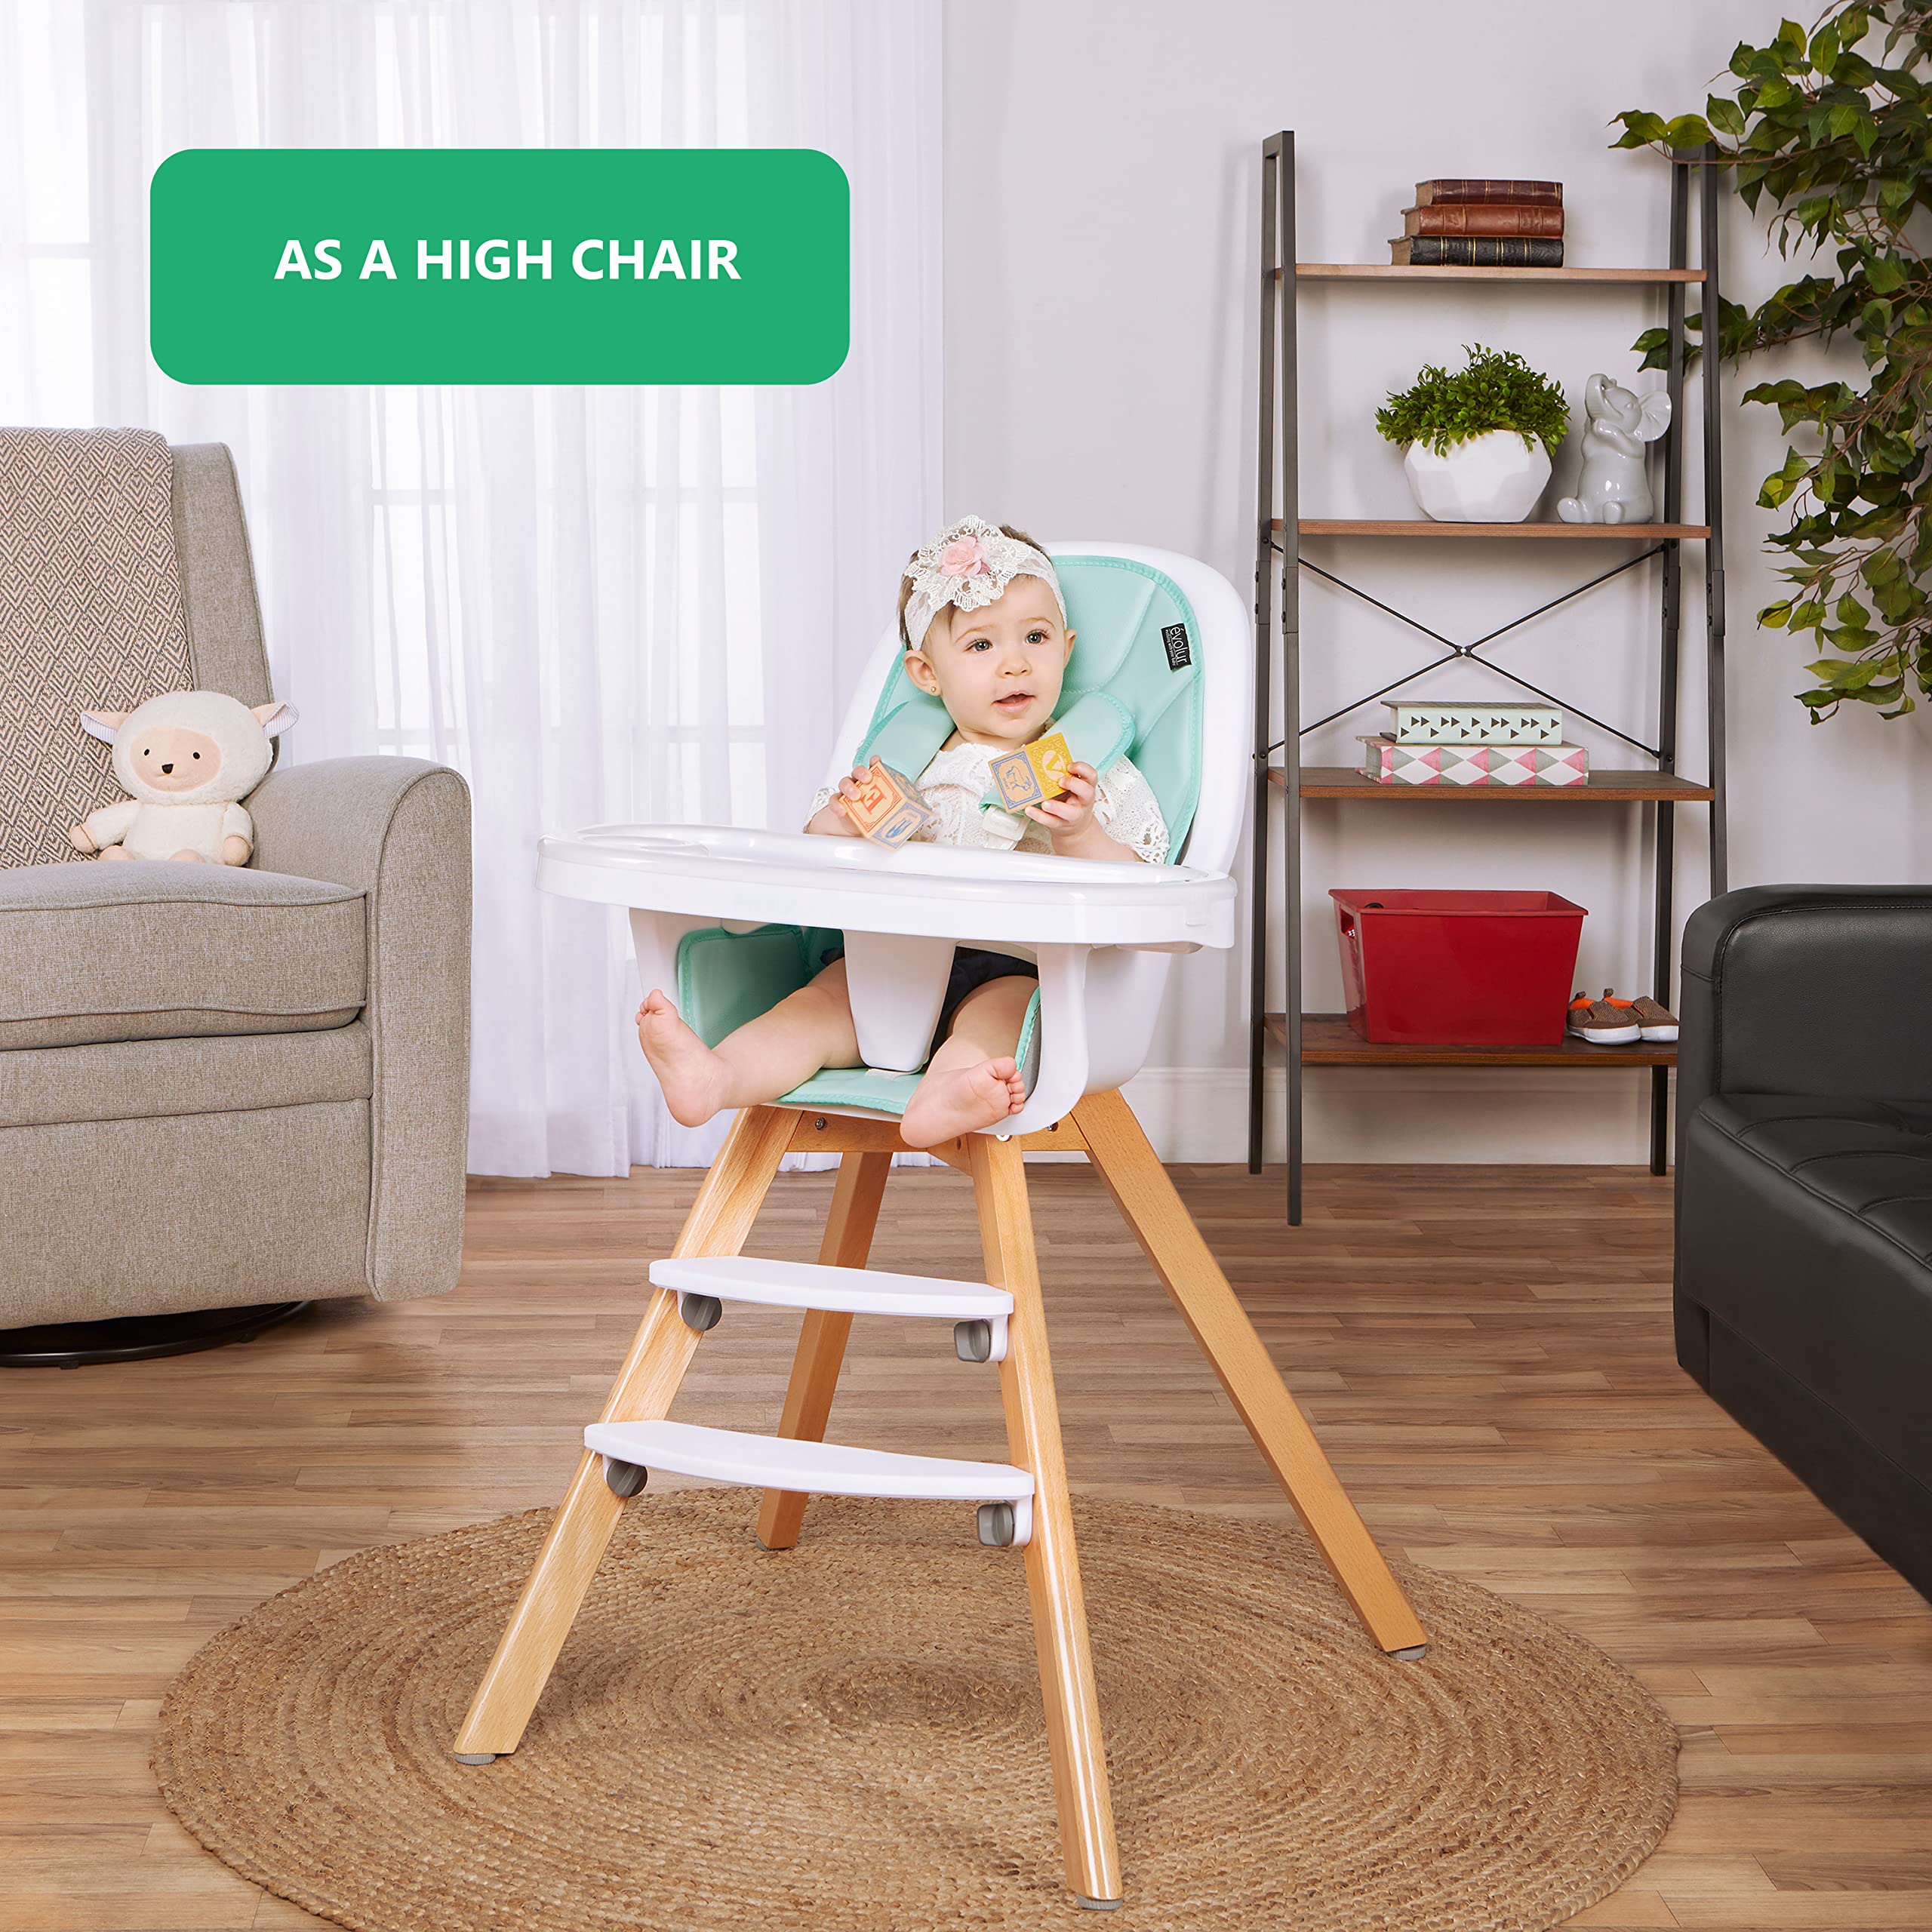 Evolur Zoodle 2 in 1 Baby High Chair in Mint, Easy to Clean, Adjustable and Removable Tray, Compact and Portable Convertible High Chair for Babies and Toddlers